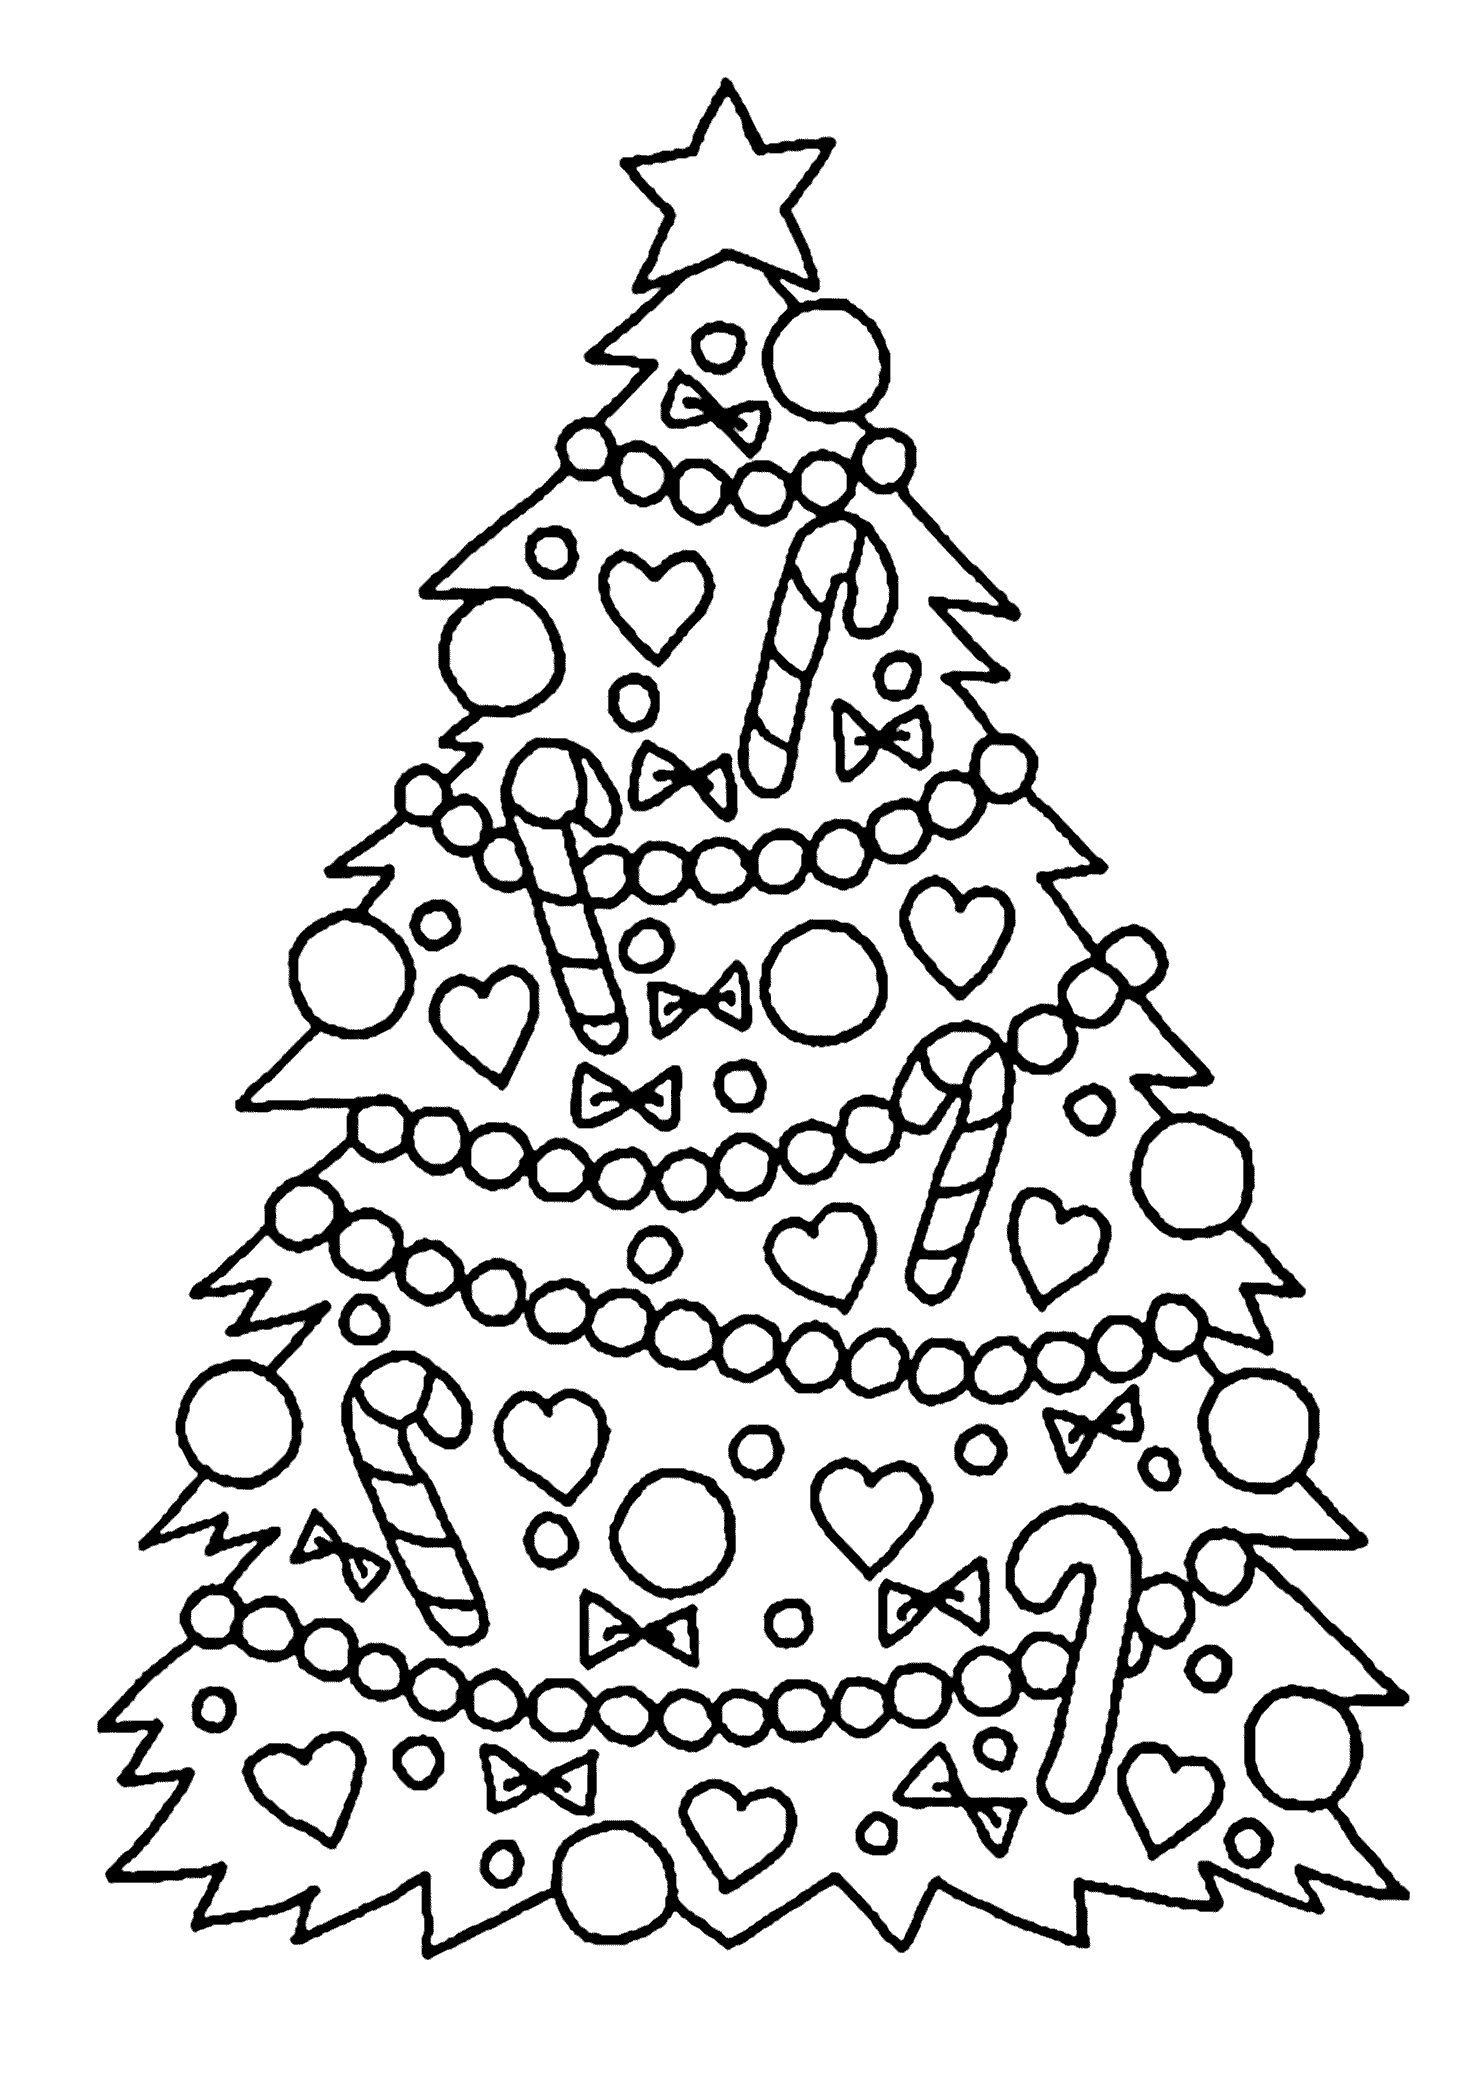 colouring pages christmas free coloring now blog archive free christmas coloring colouring christmas free pages 